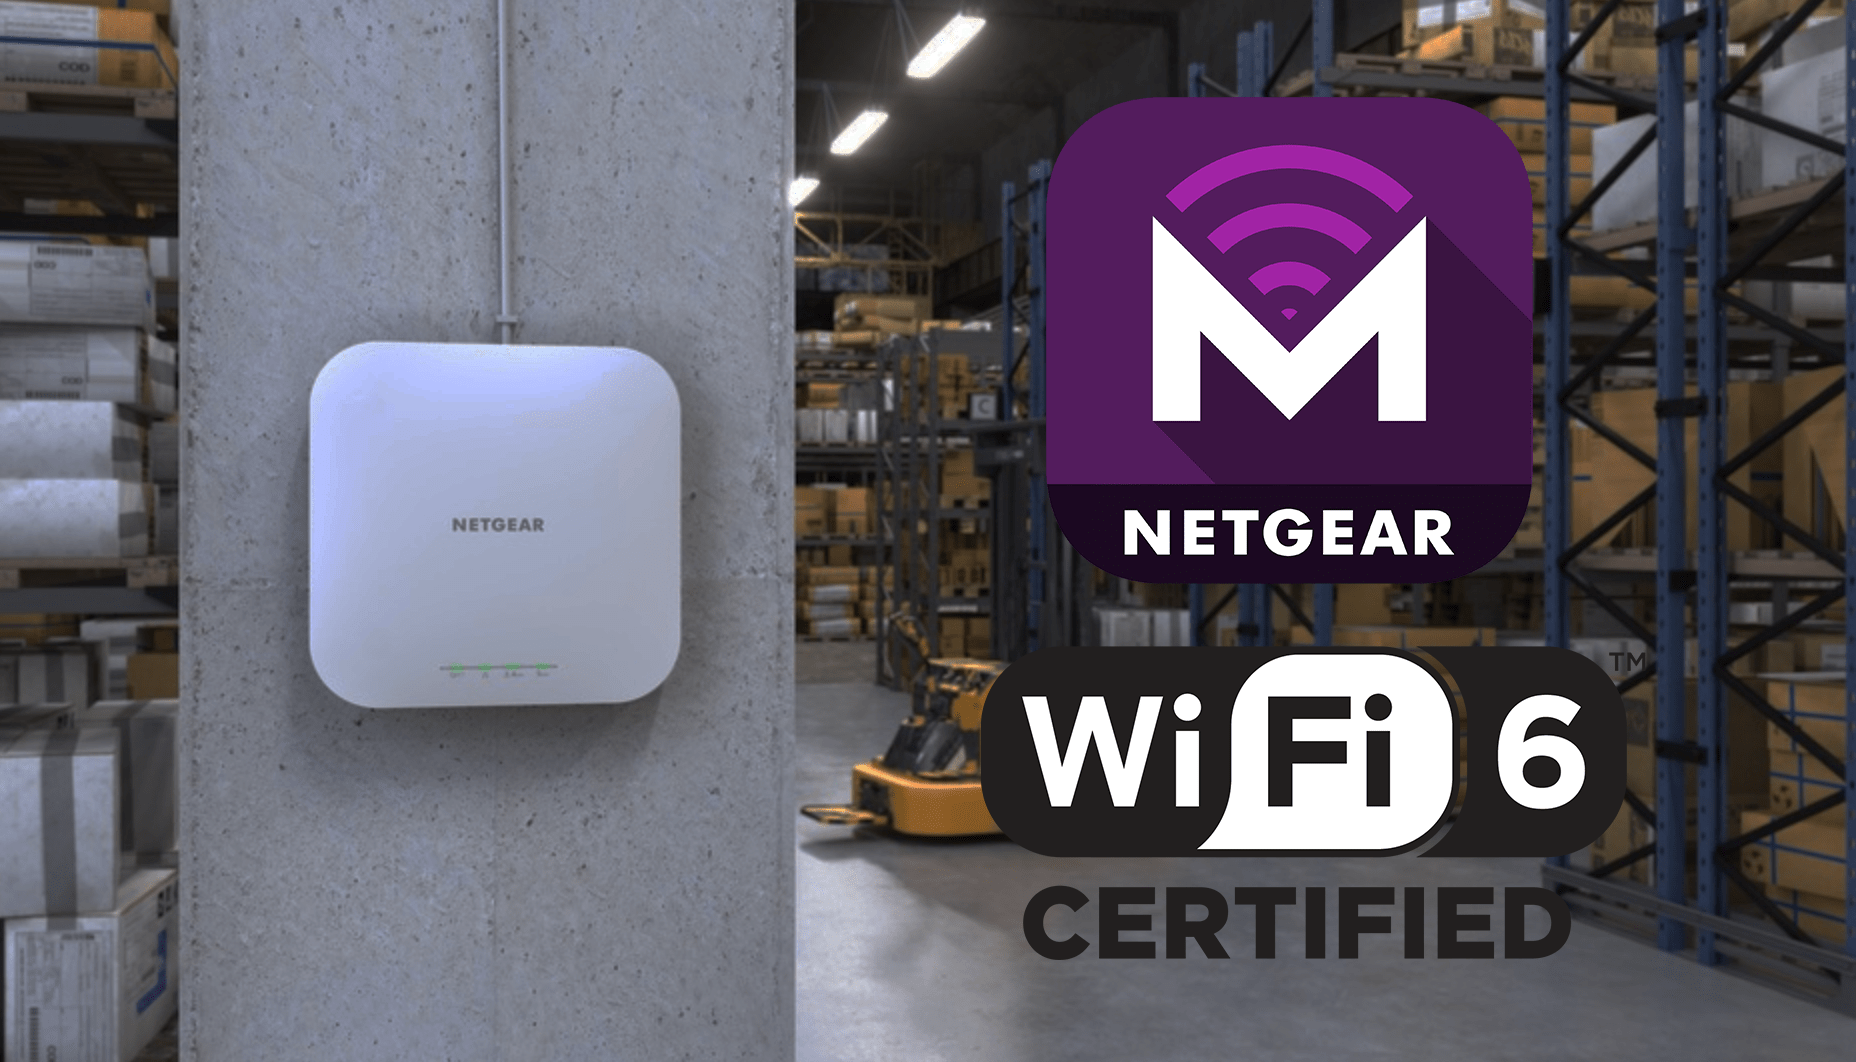 Netgear WAX620 WiFi 6 Access Point Launched – 4×4 MIMO with a 2.5Gbps PoE LAN but no 160MHz channel width